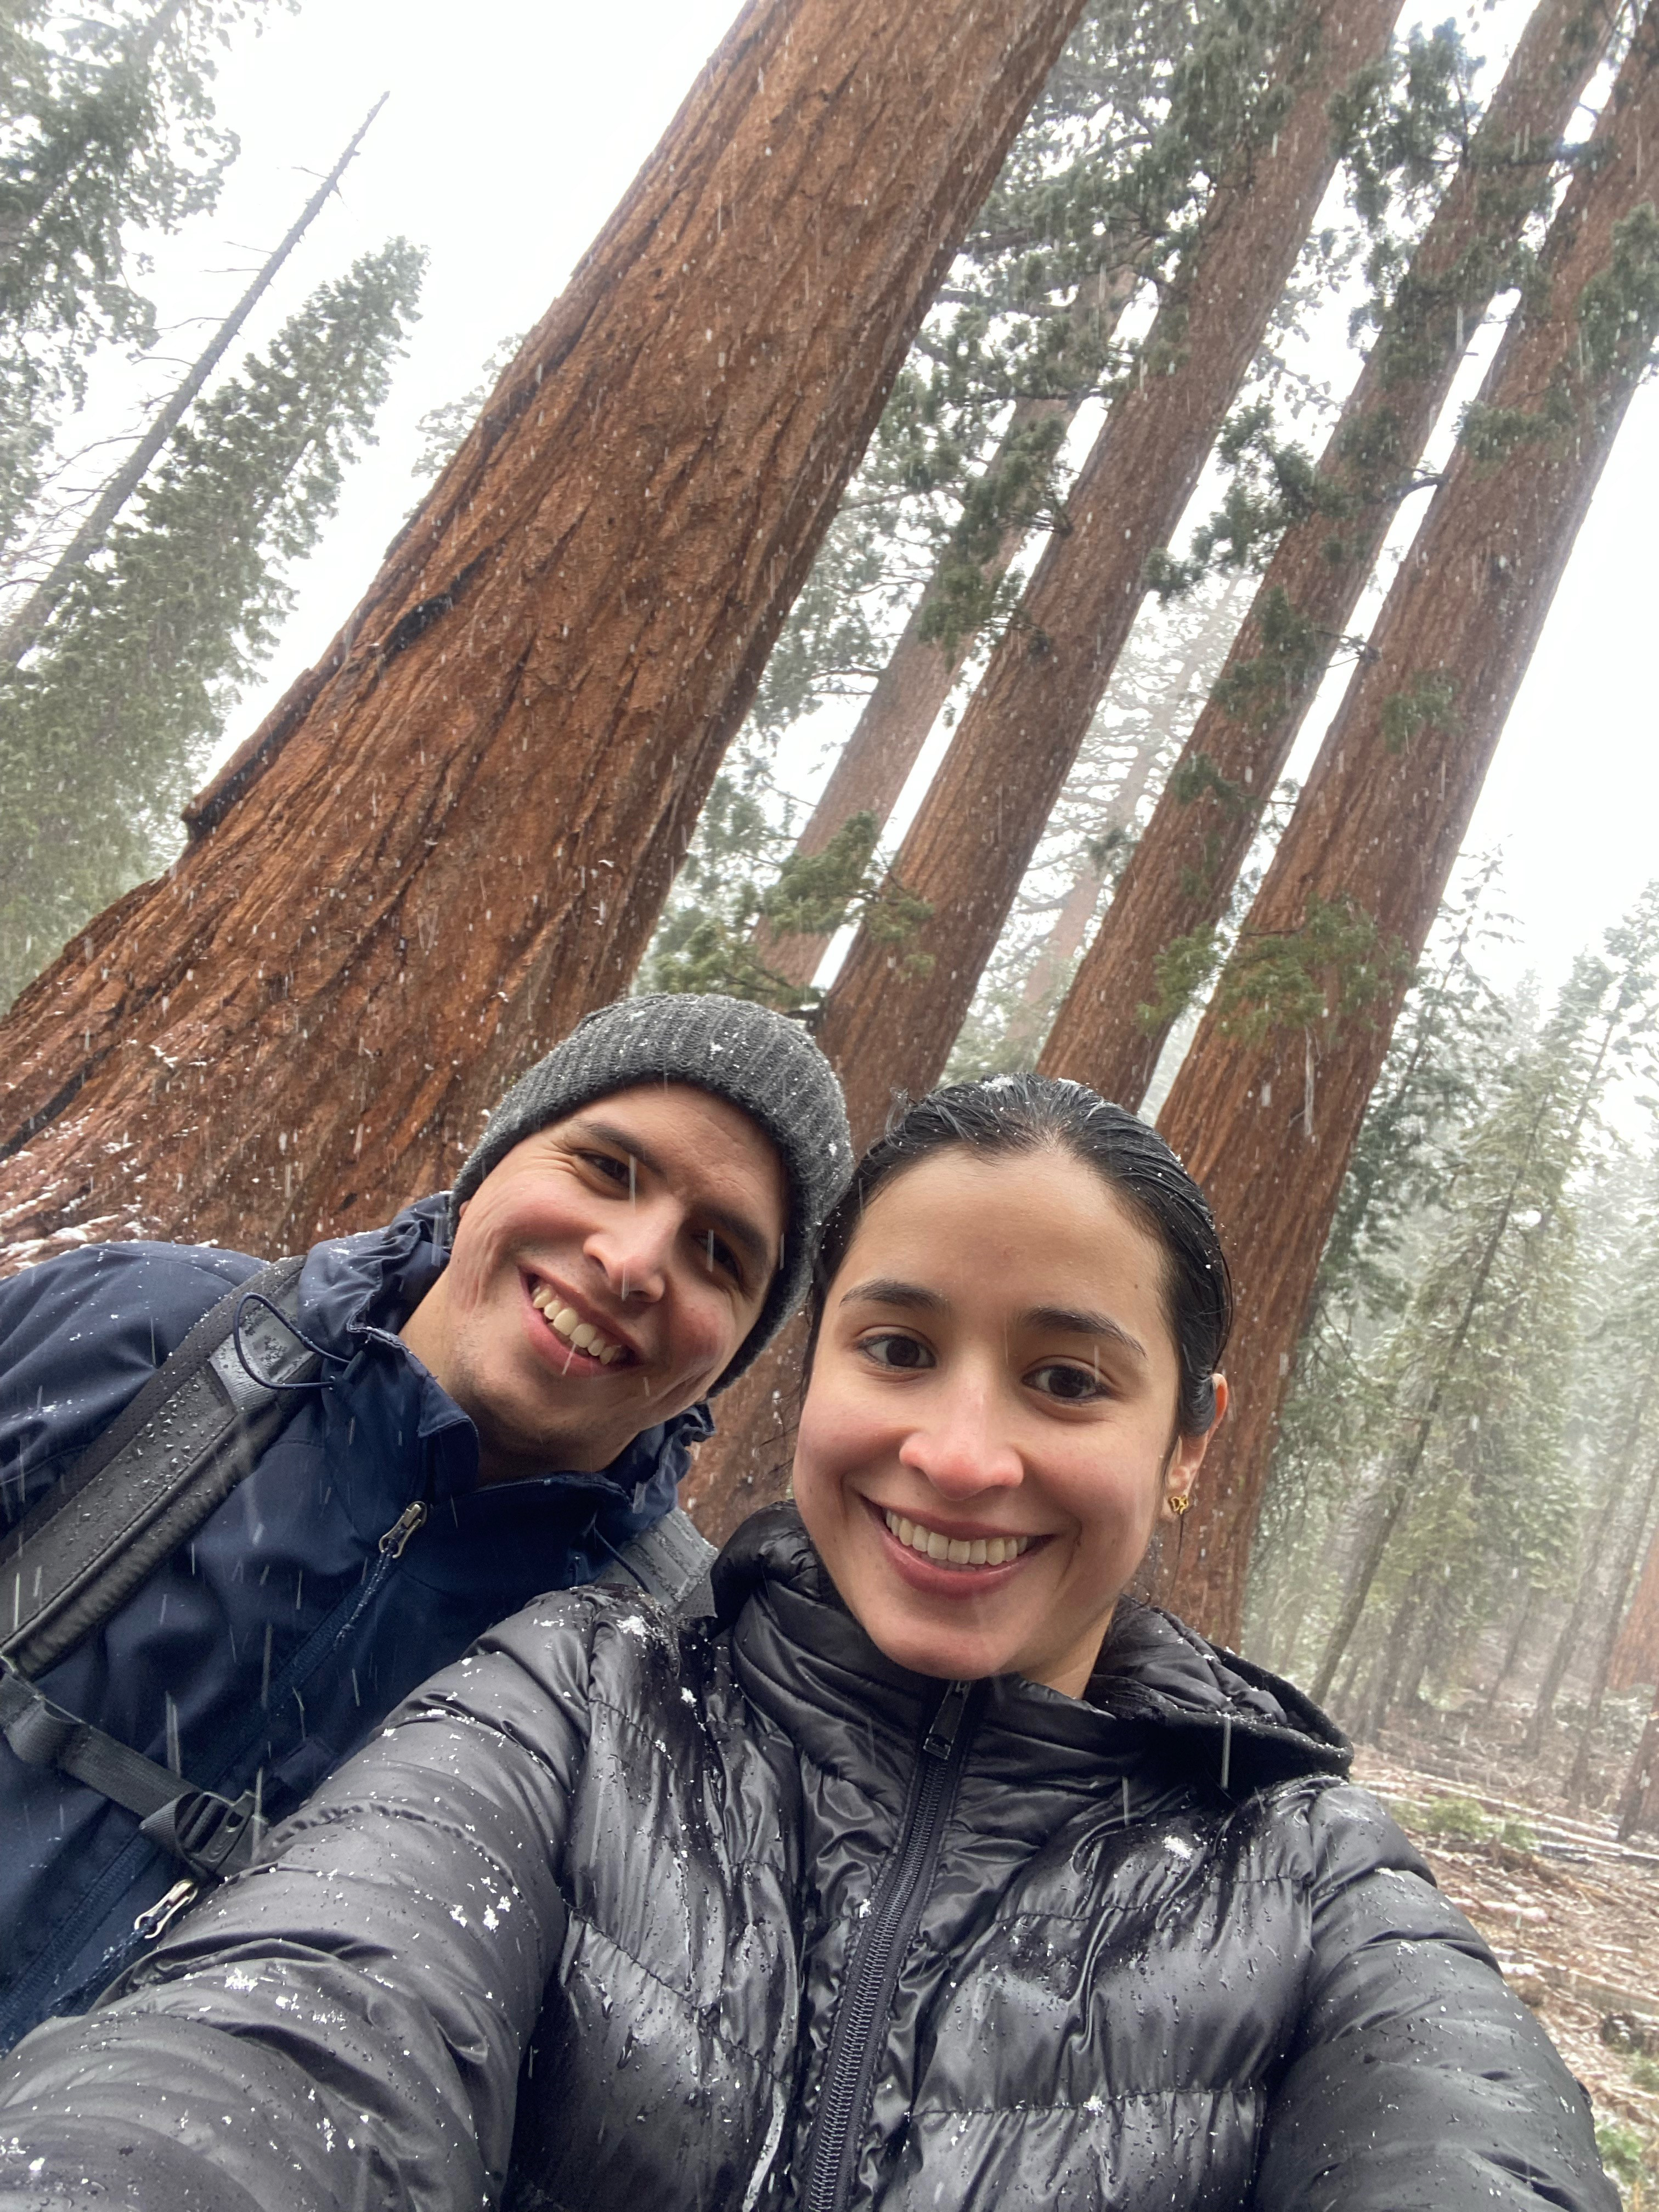 Image of Laura and her husband on a visit to Yosemite National Park in April 2022.